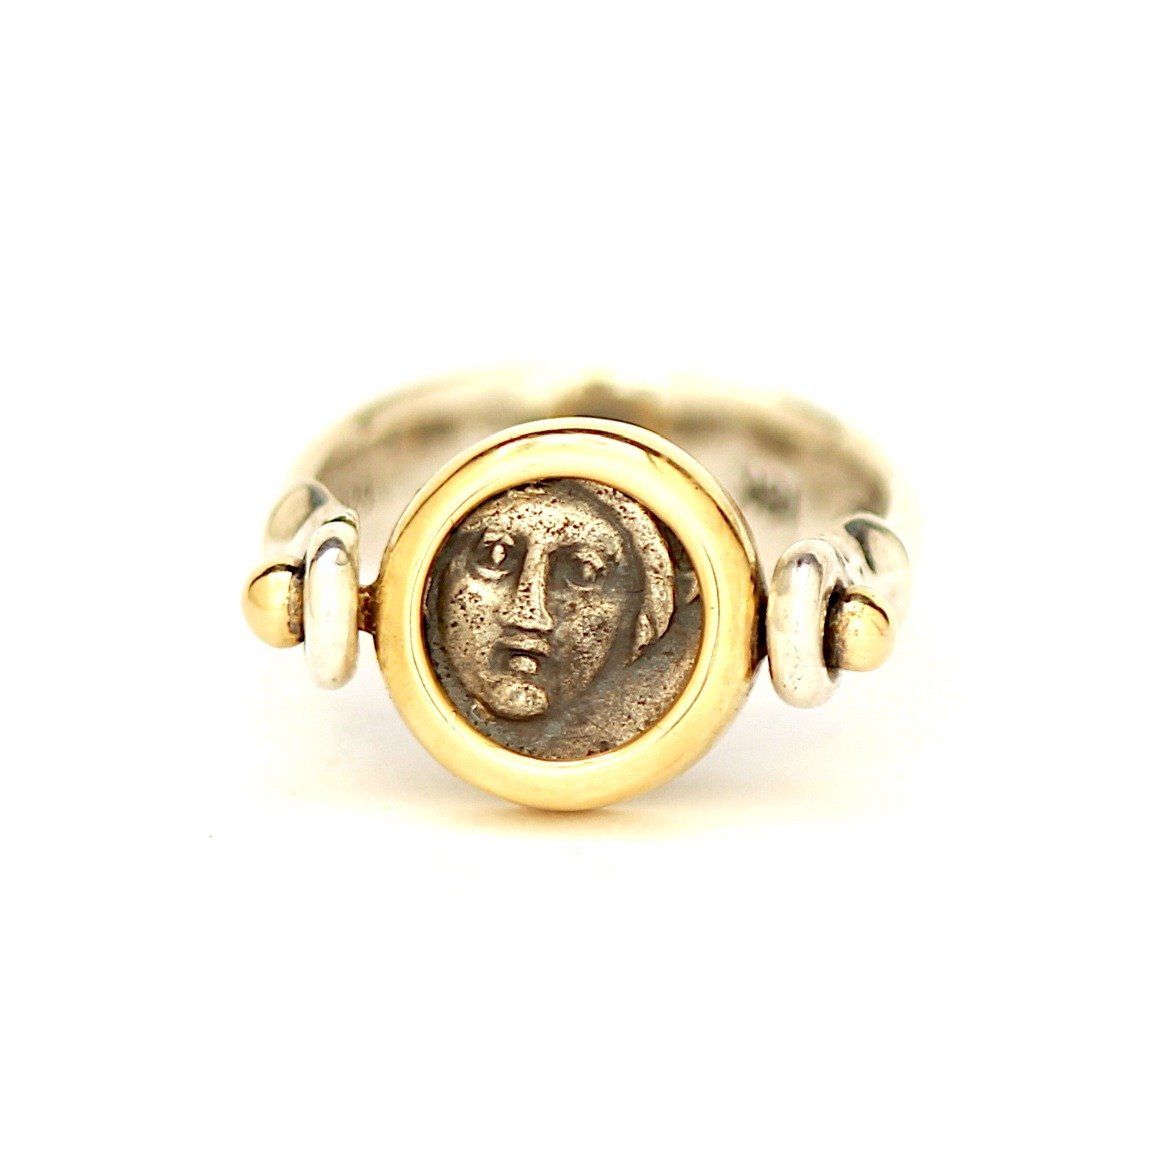 Greek Coin, Swivel Ring, Apollo, 14K Gold and Silver, Genuine Ancient Coin, with Certificate ID13151 - Erez Ancient Coin Jewelry 